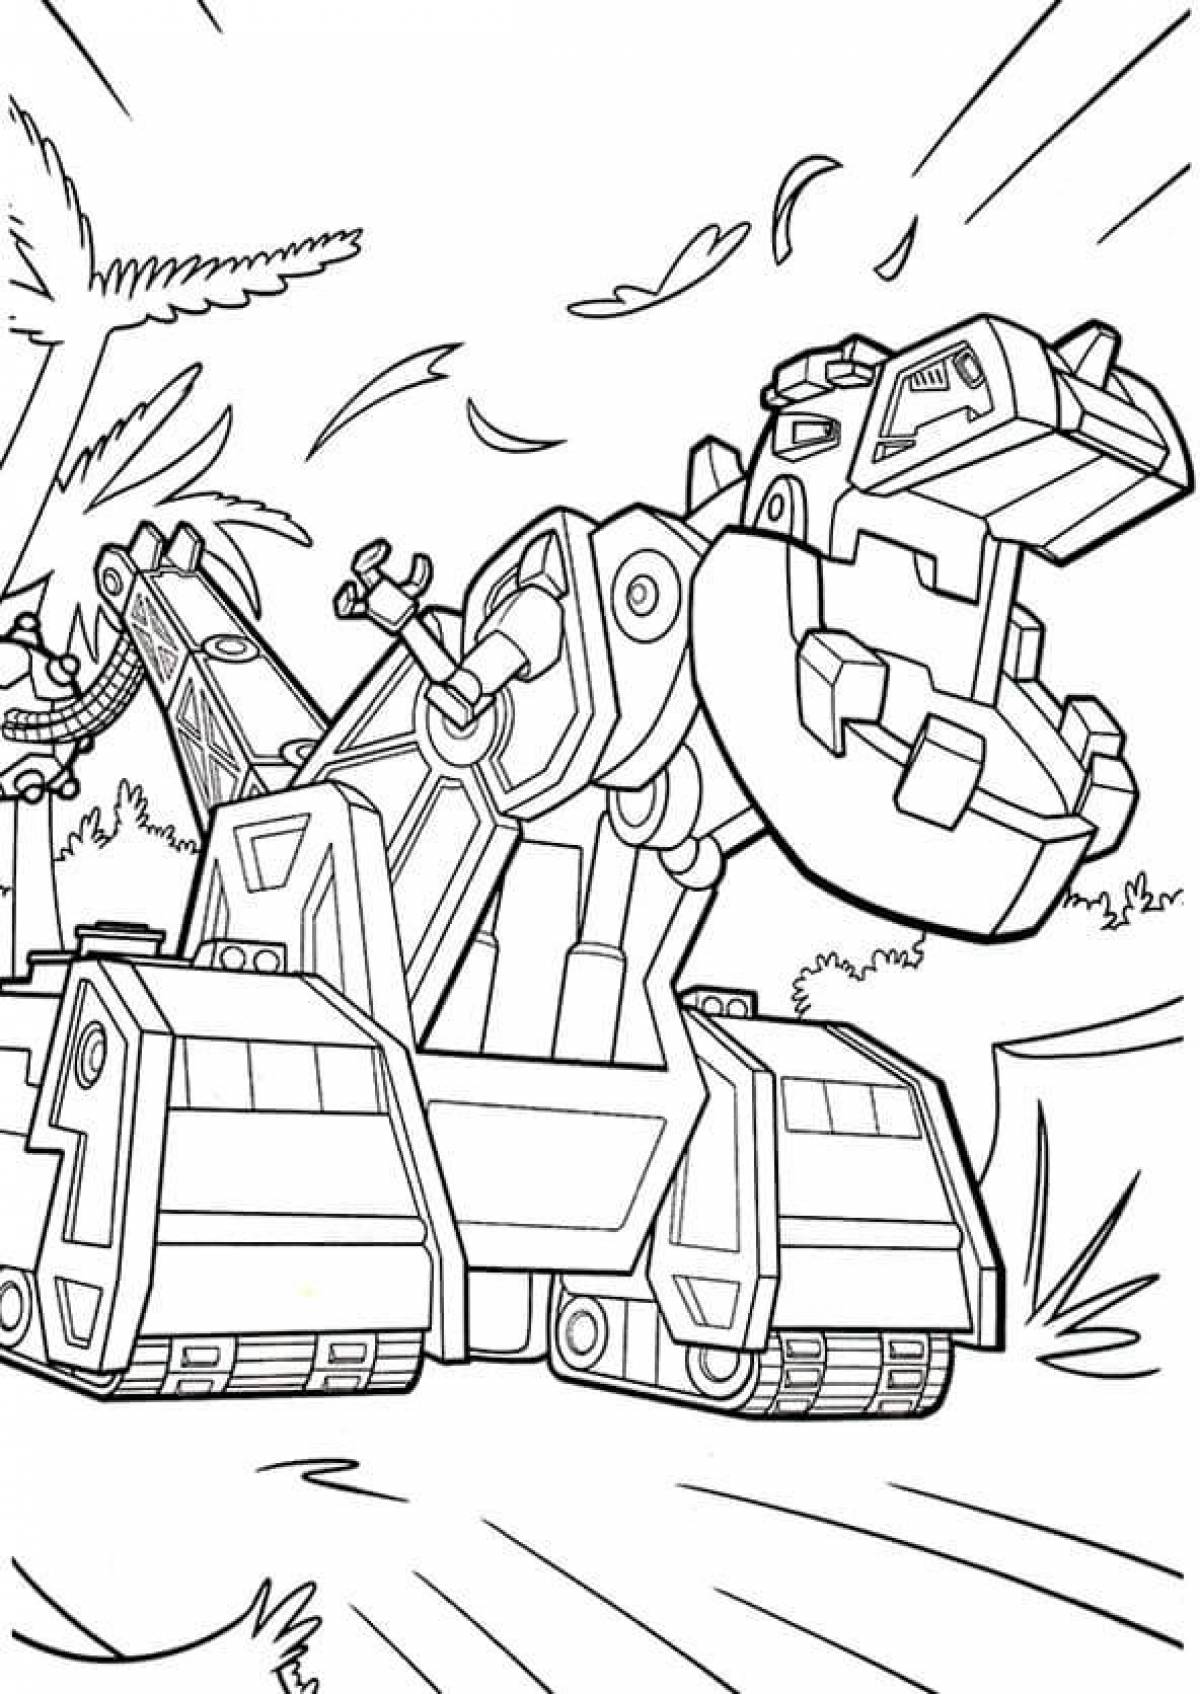 Awesome dino team coloring book